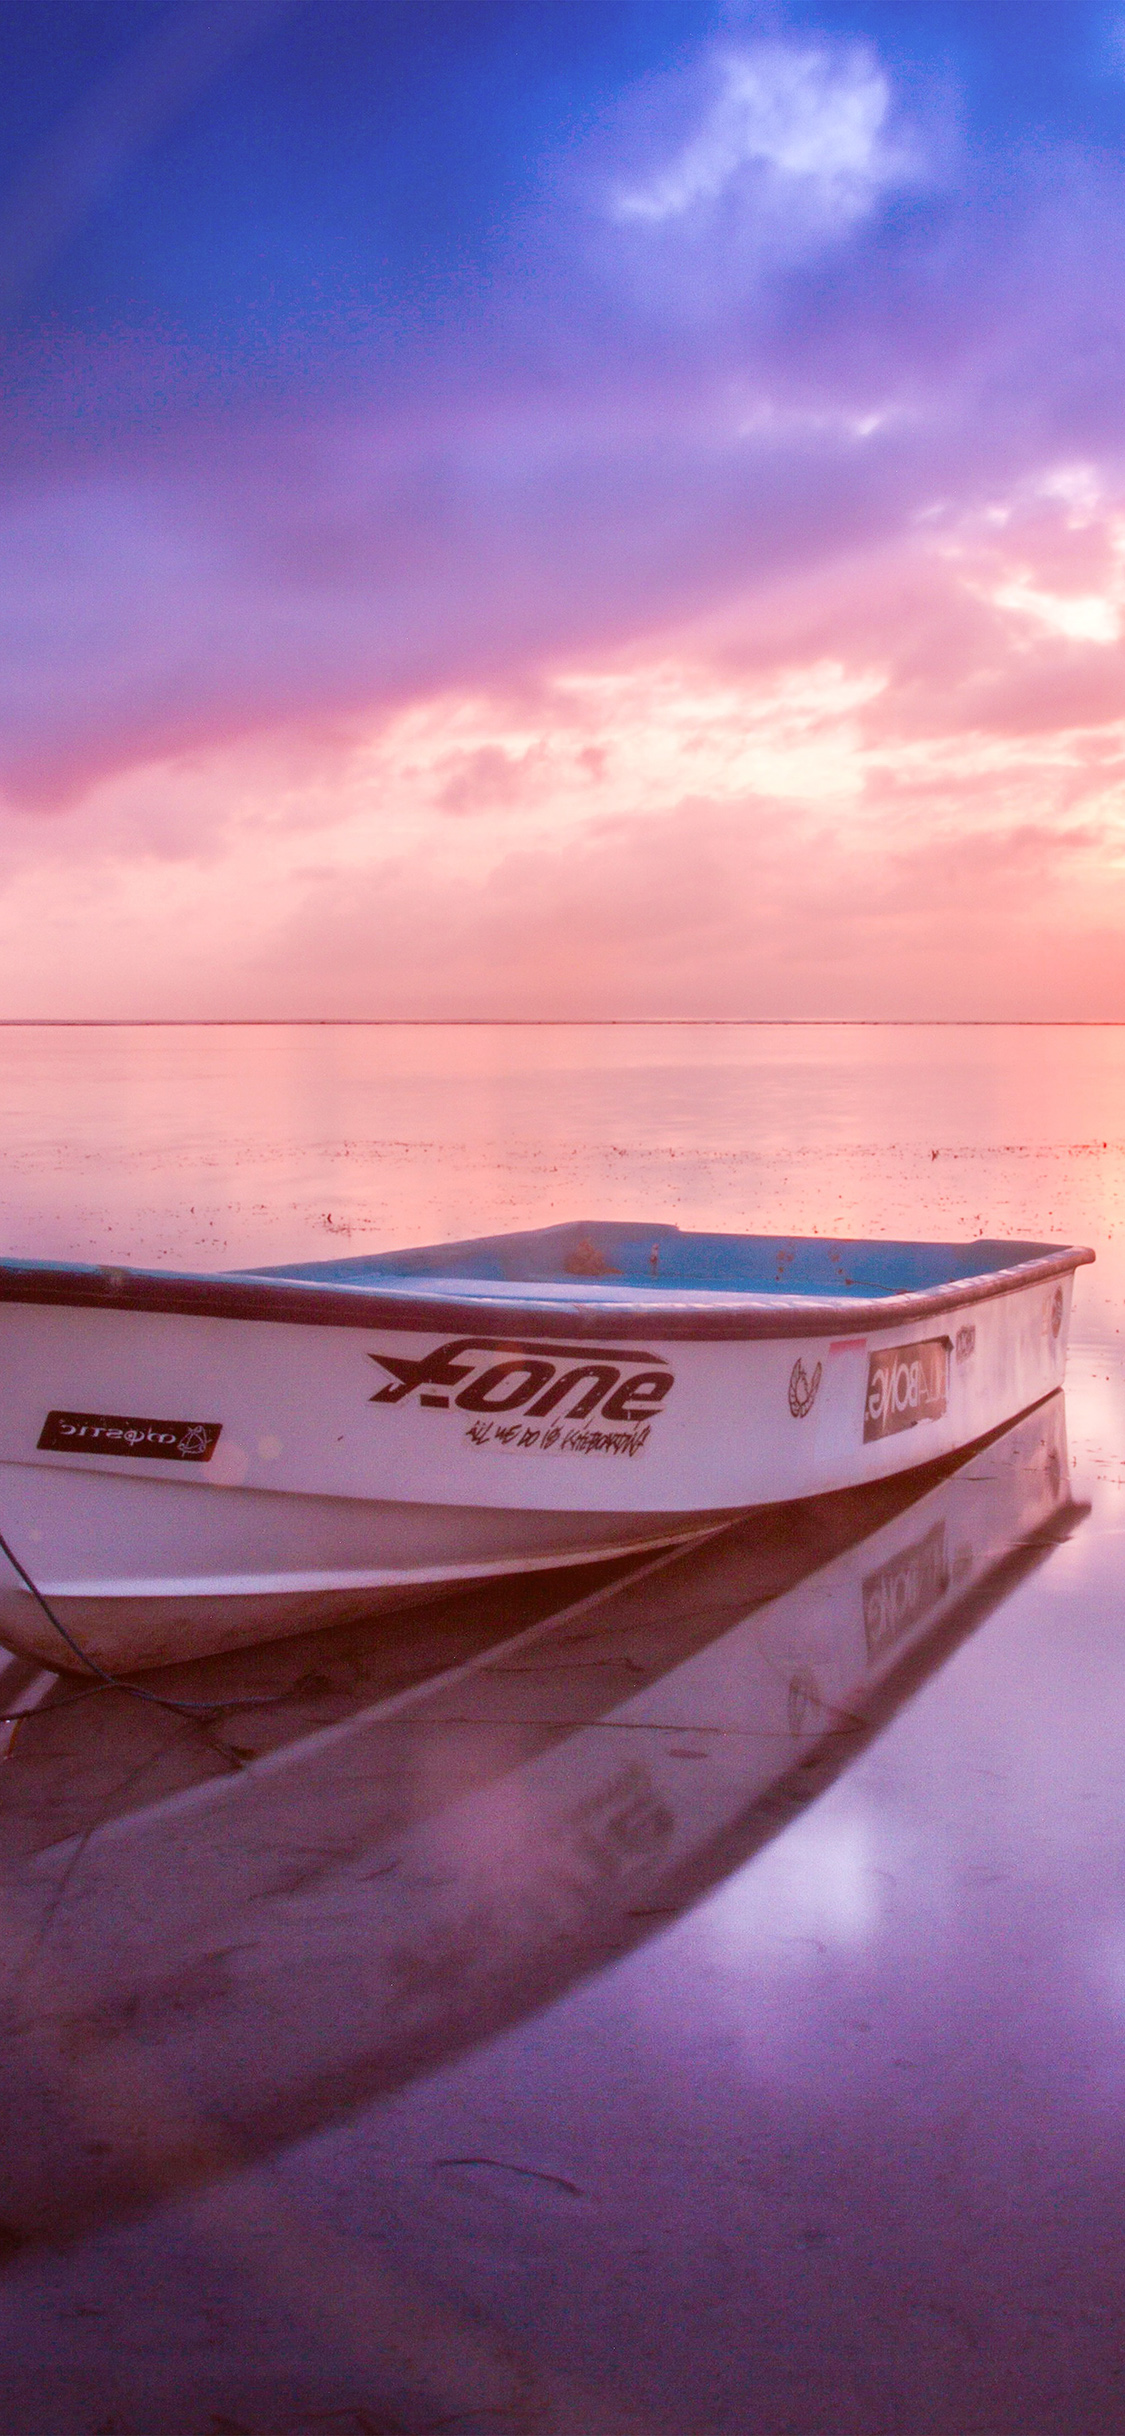 iPhone X wallpaper. nature sea beach boat alone sunset blue pink flare